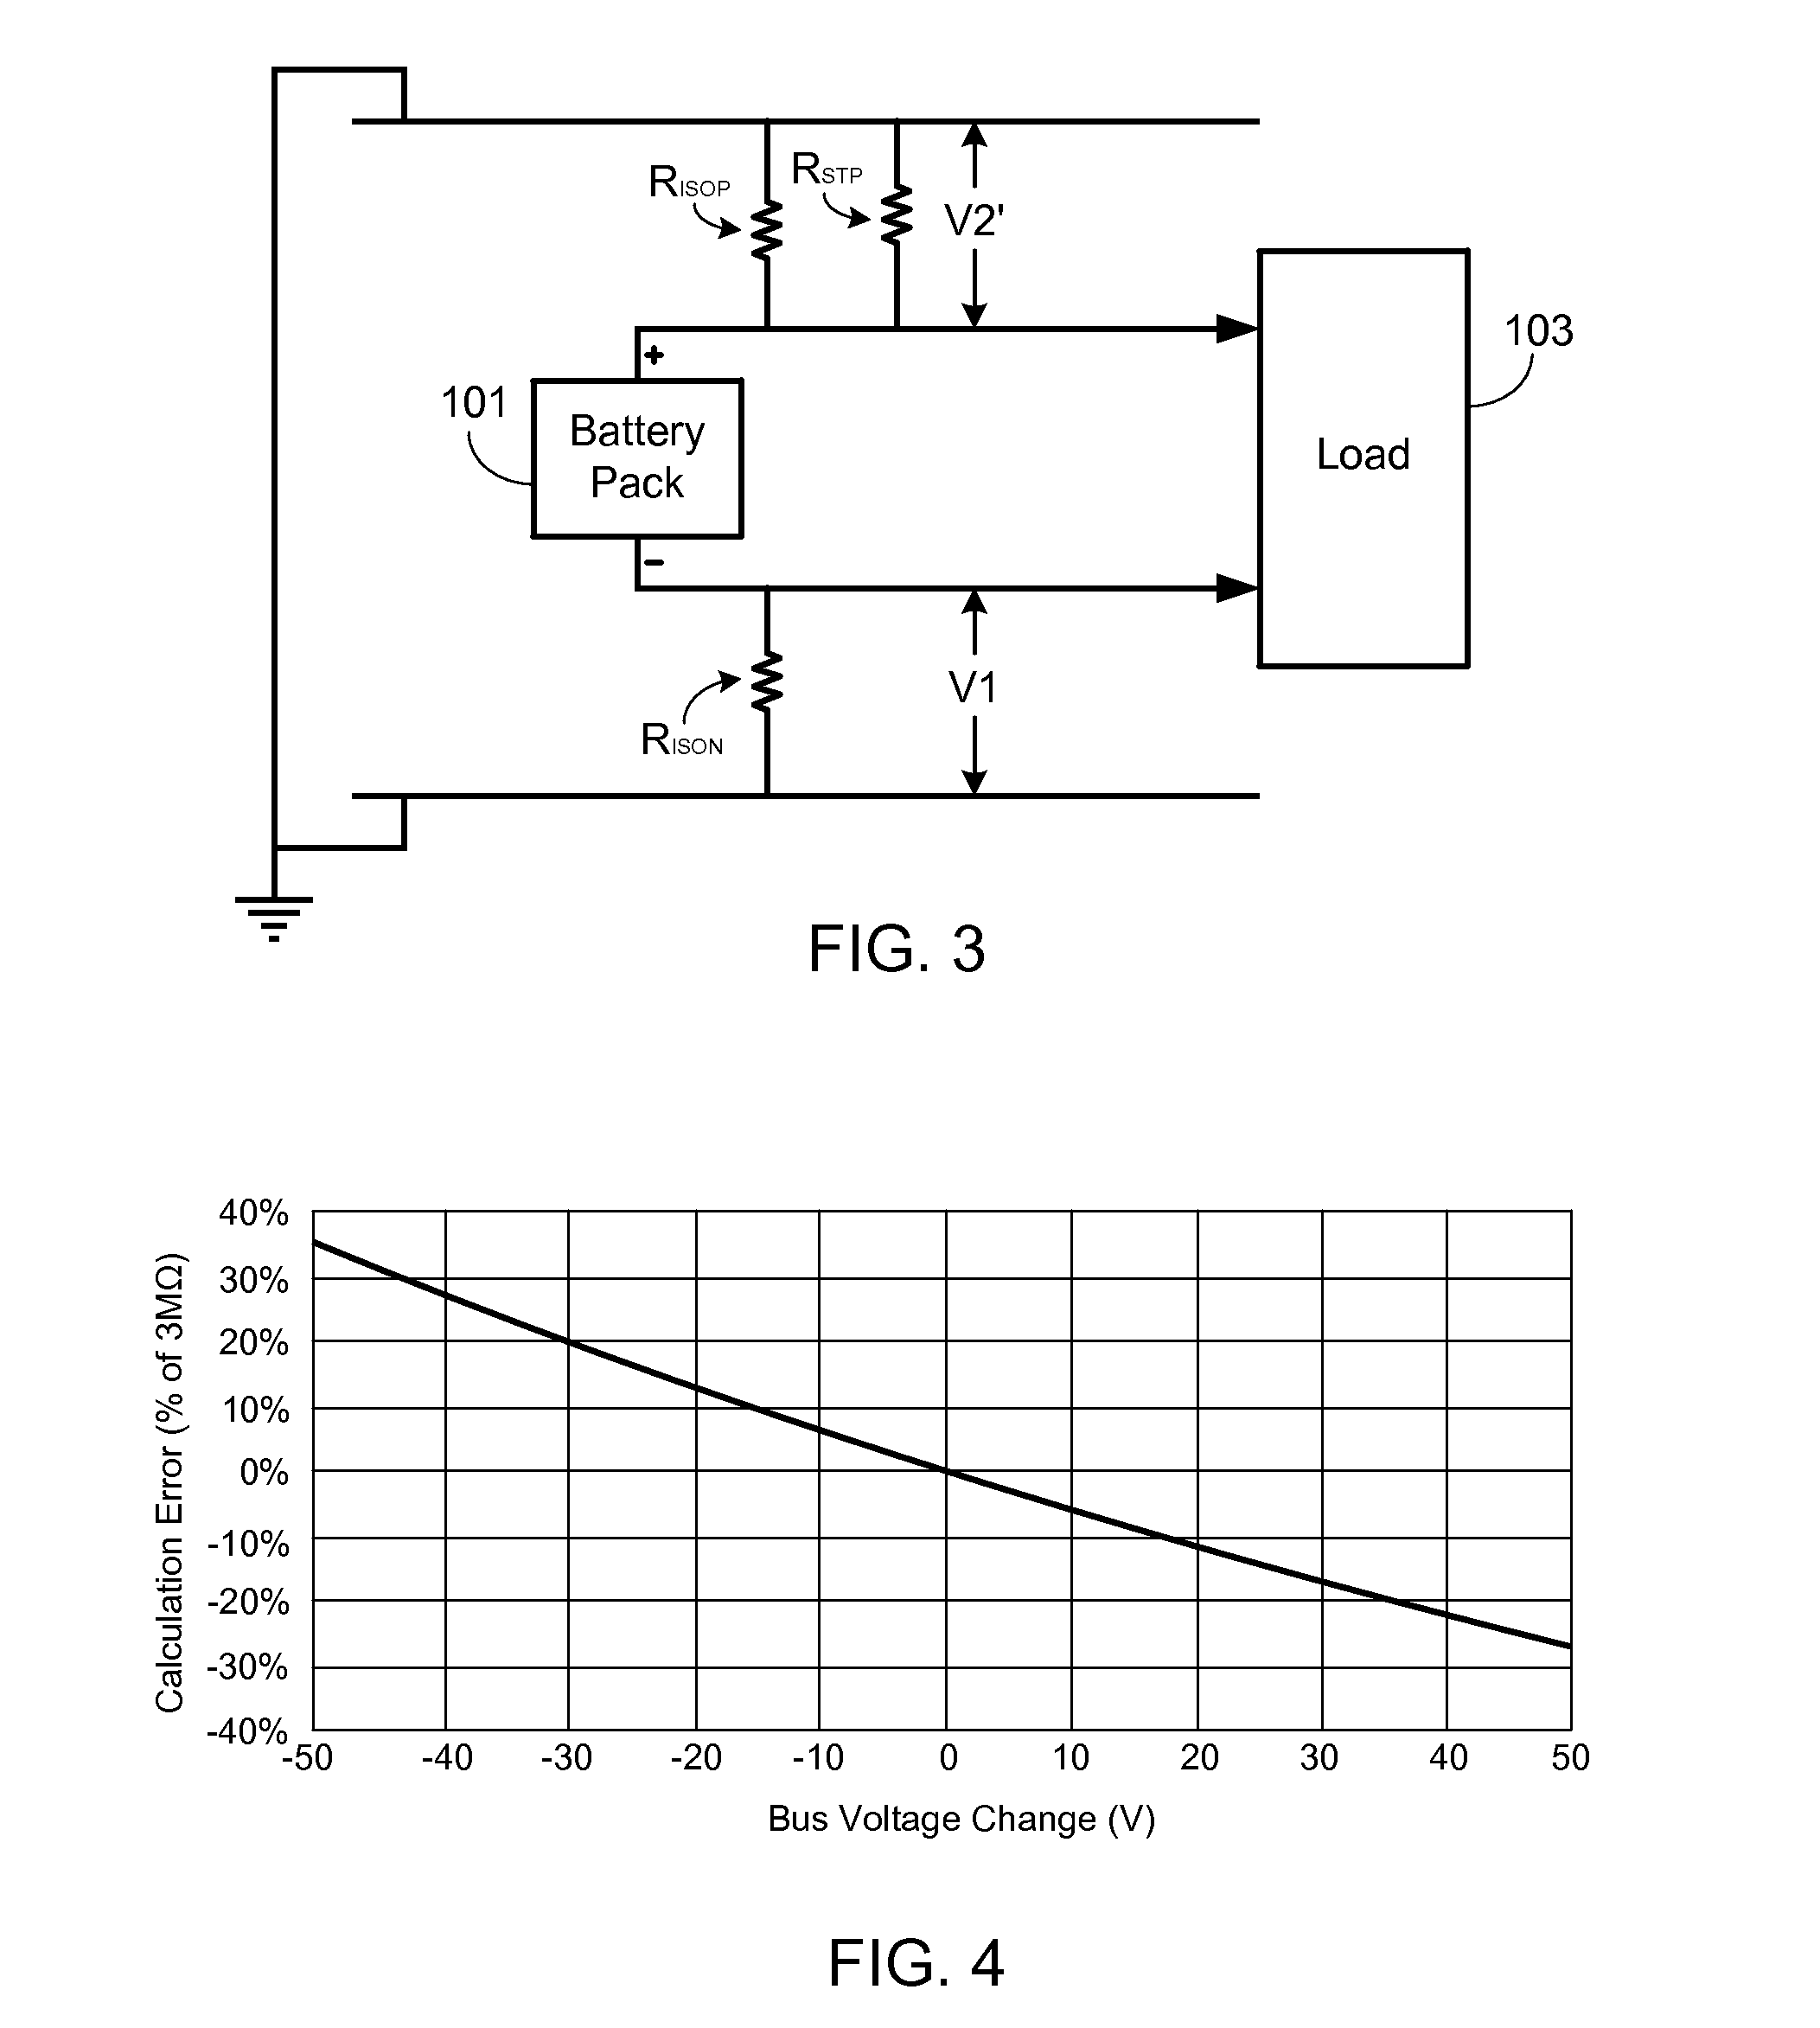 Method for Determining Battery Pack Isolation Resistance Via Dual Bus Monitoring